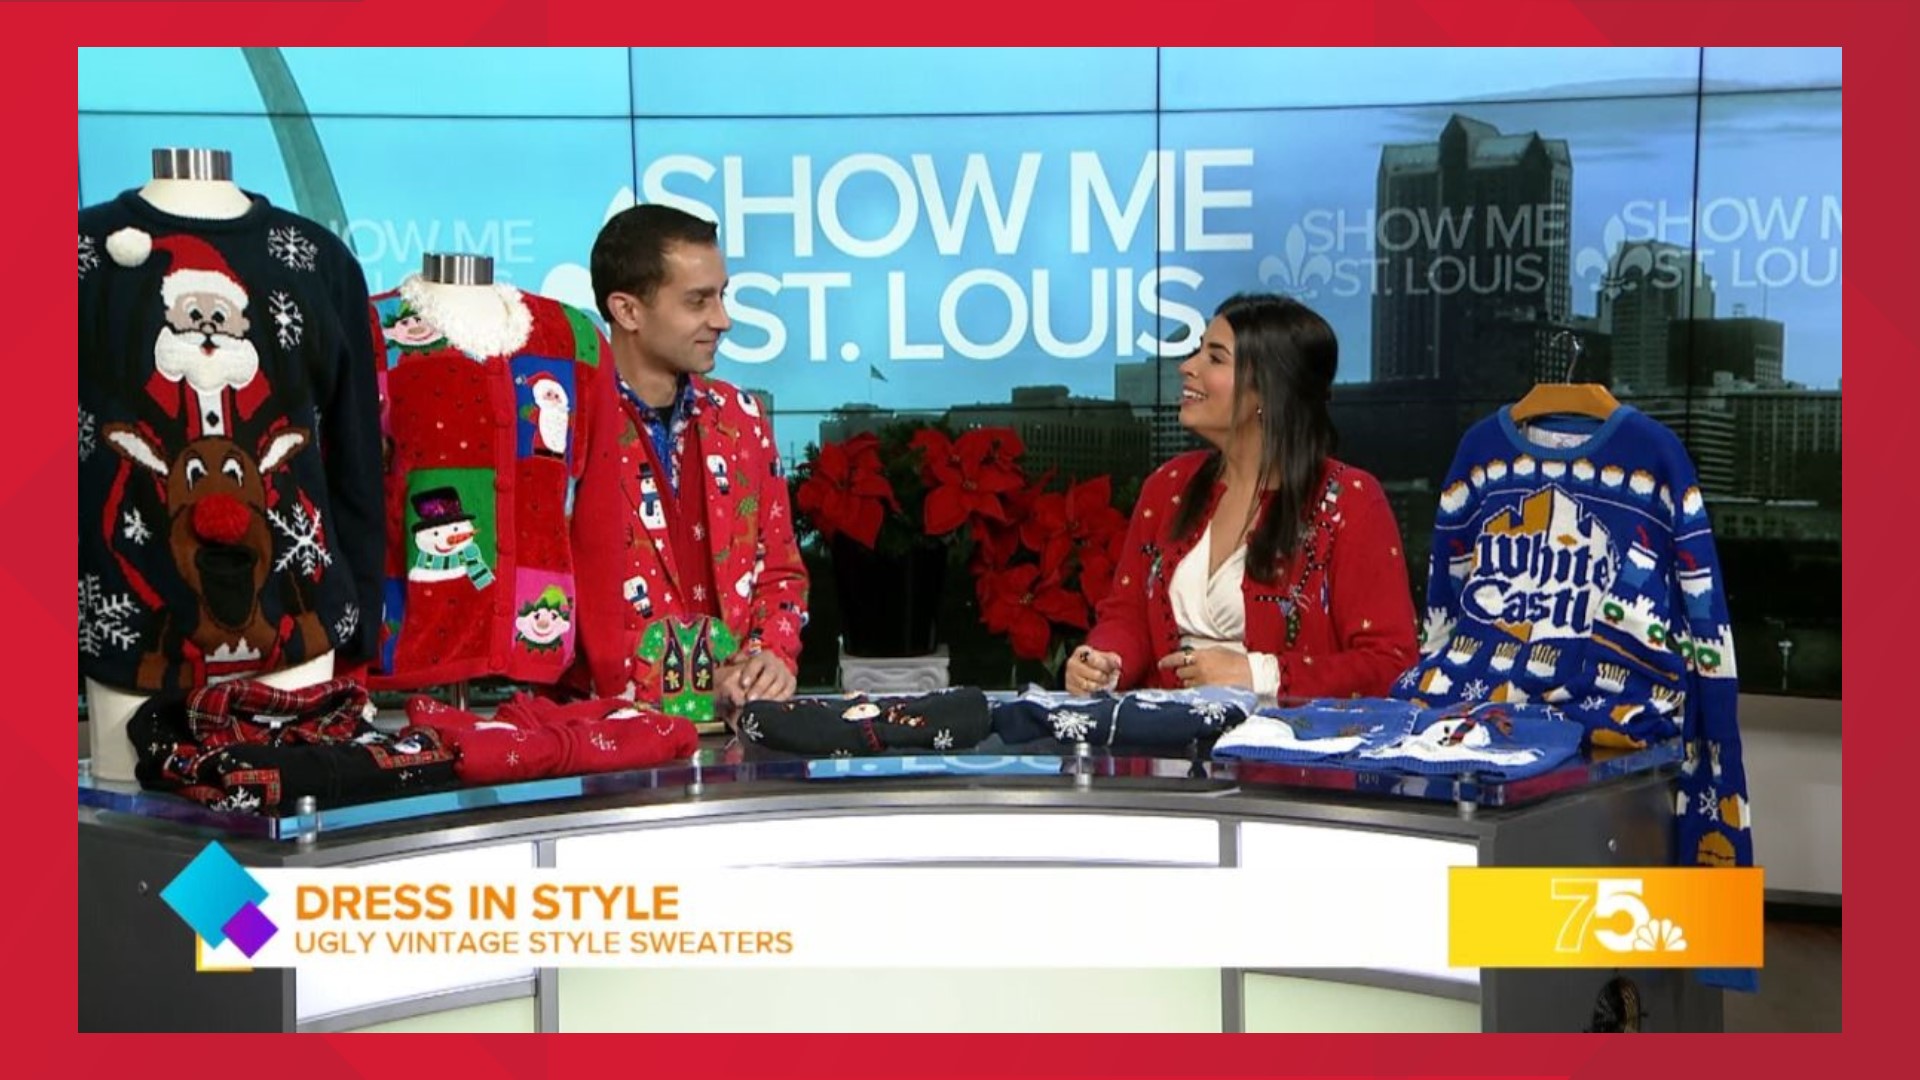 There’s nothing worse than scrambling for a holiday party outfit at the very last minute. That's why one STL local built a business to solve the issue with sweaters.